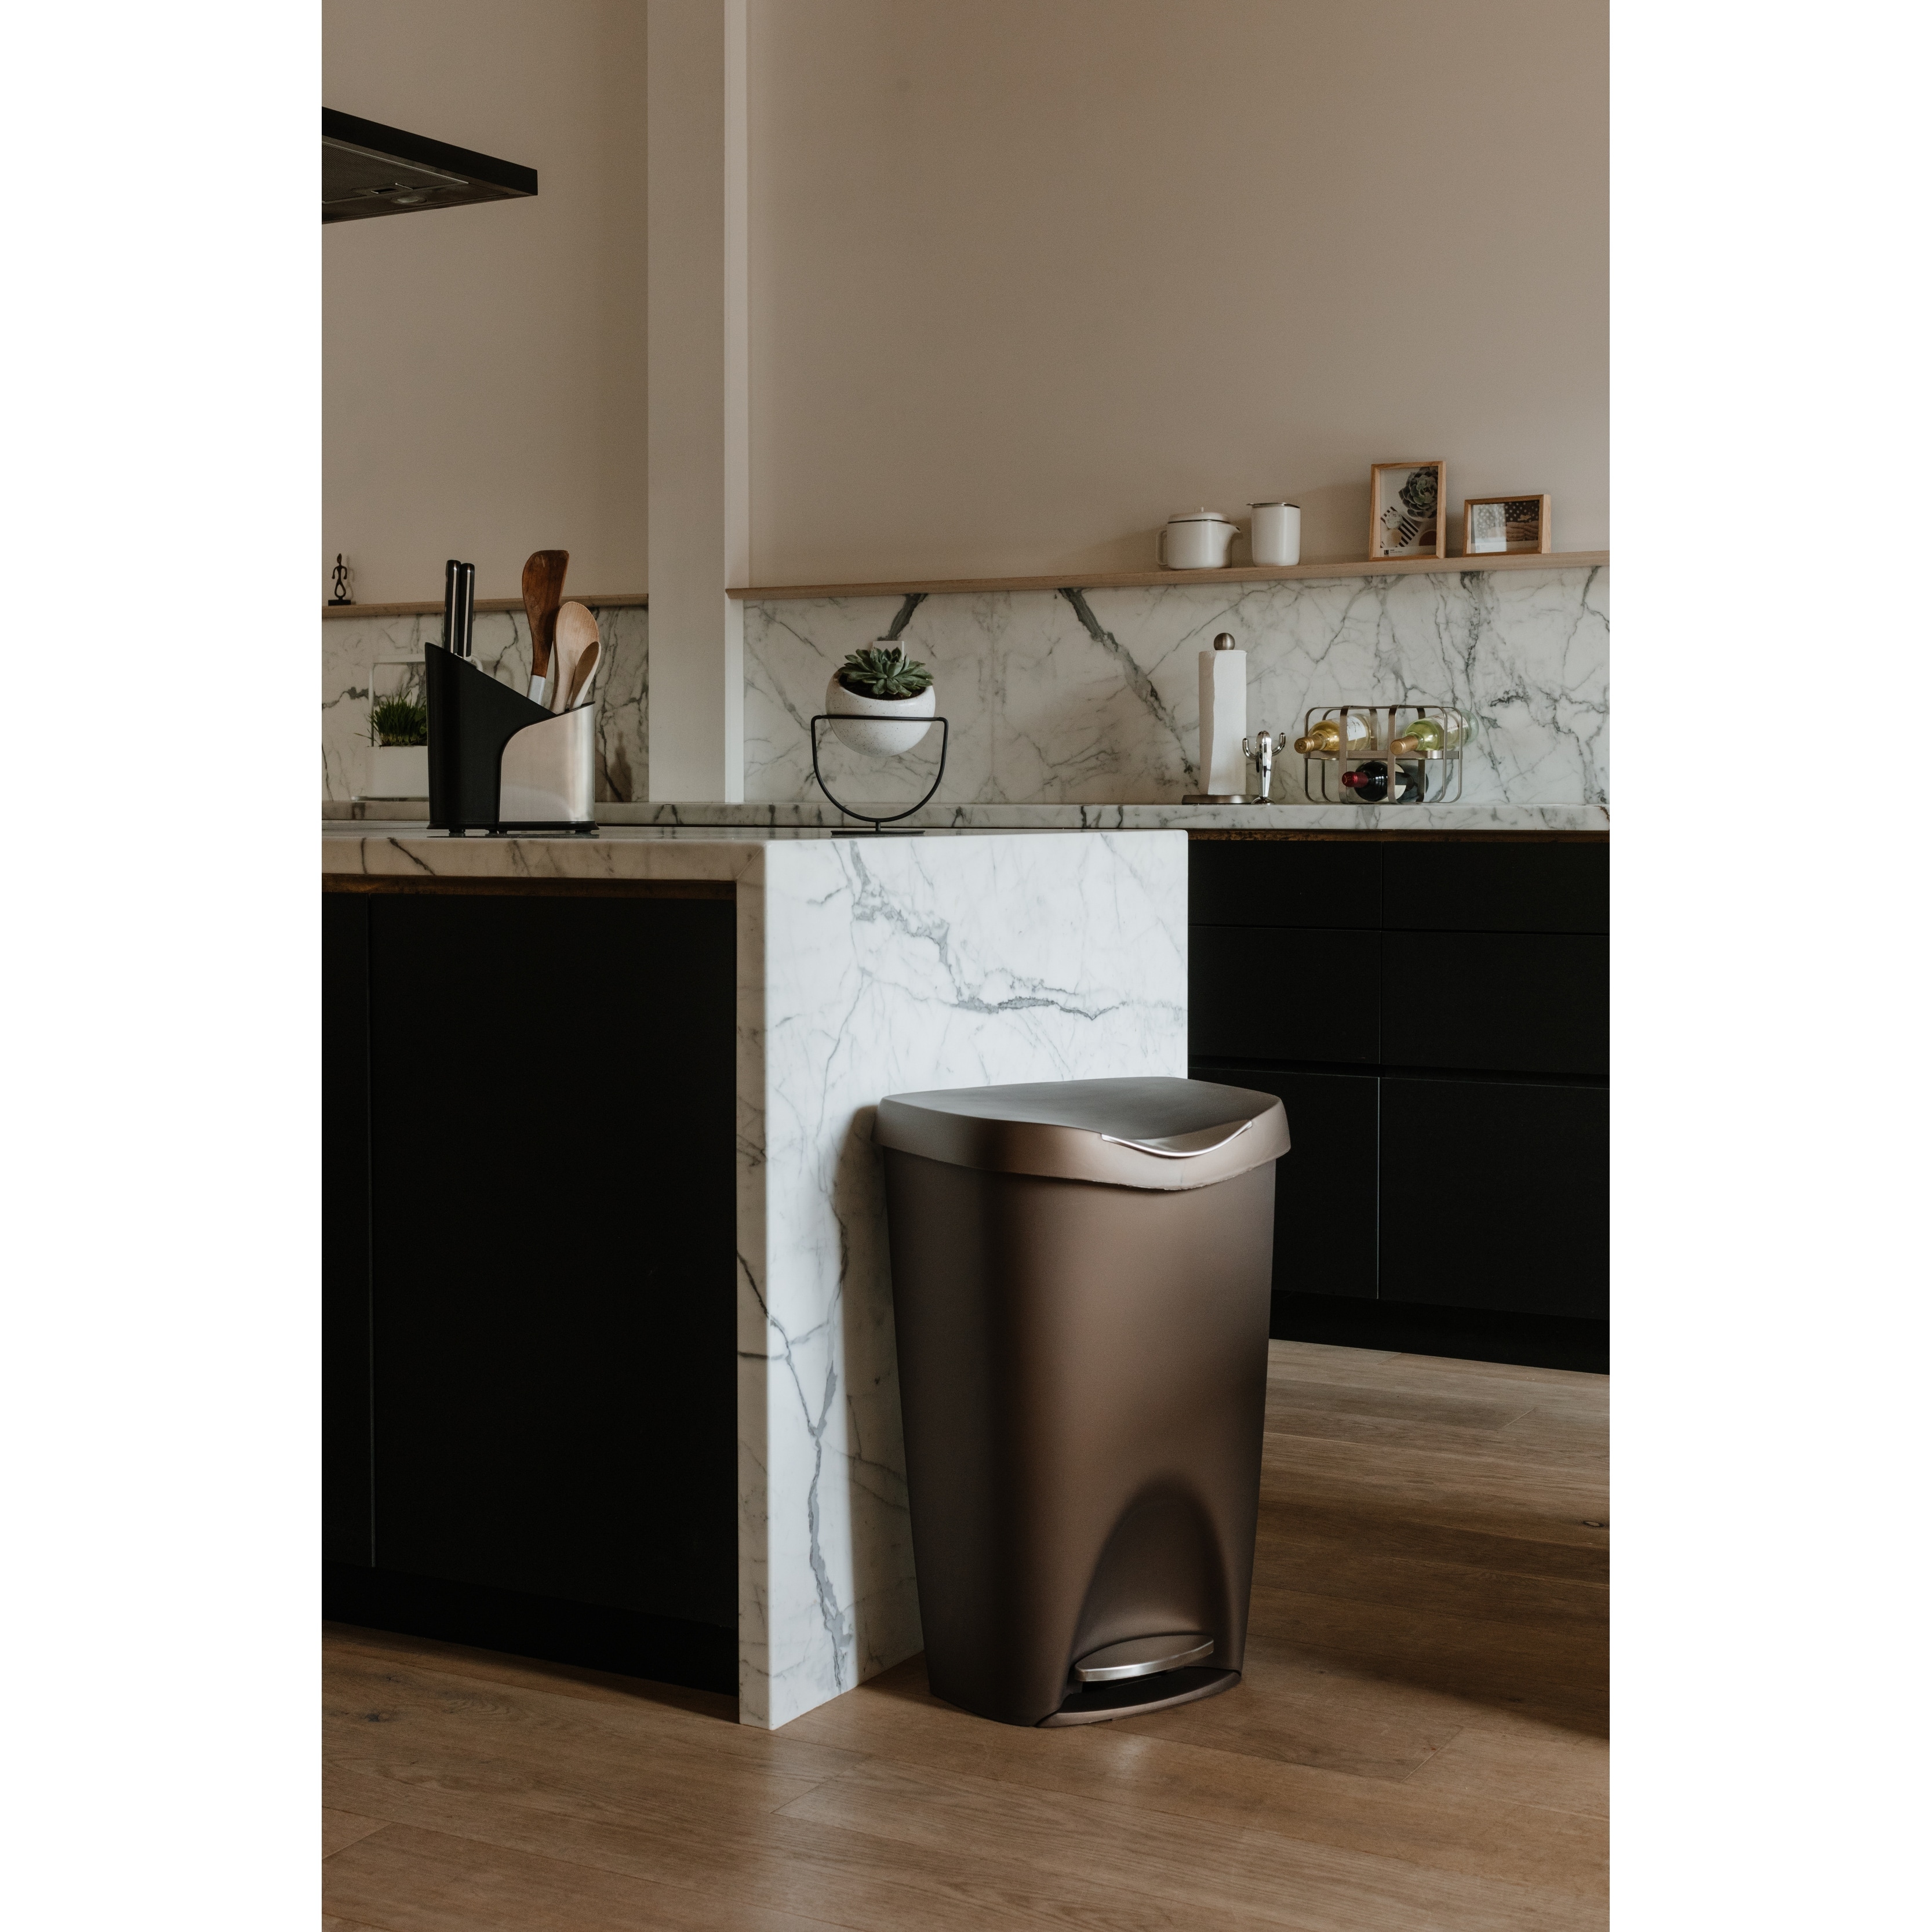 https://ak1.ostkcdn.com/images/products/is/images/direct/c2e55494c280e031e8d0d9391ca1f1f27f0bae70/Umbra-Brim-Large-13-Gallon-Trash-Can-with-Foot-Pedal-and-Lid.jpg